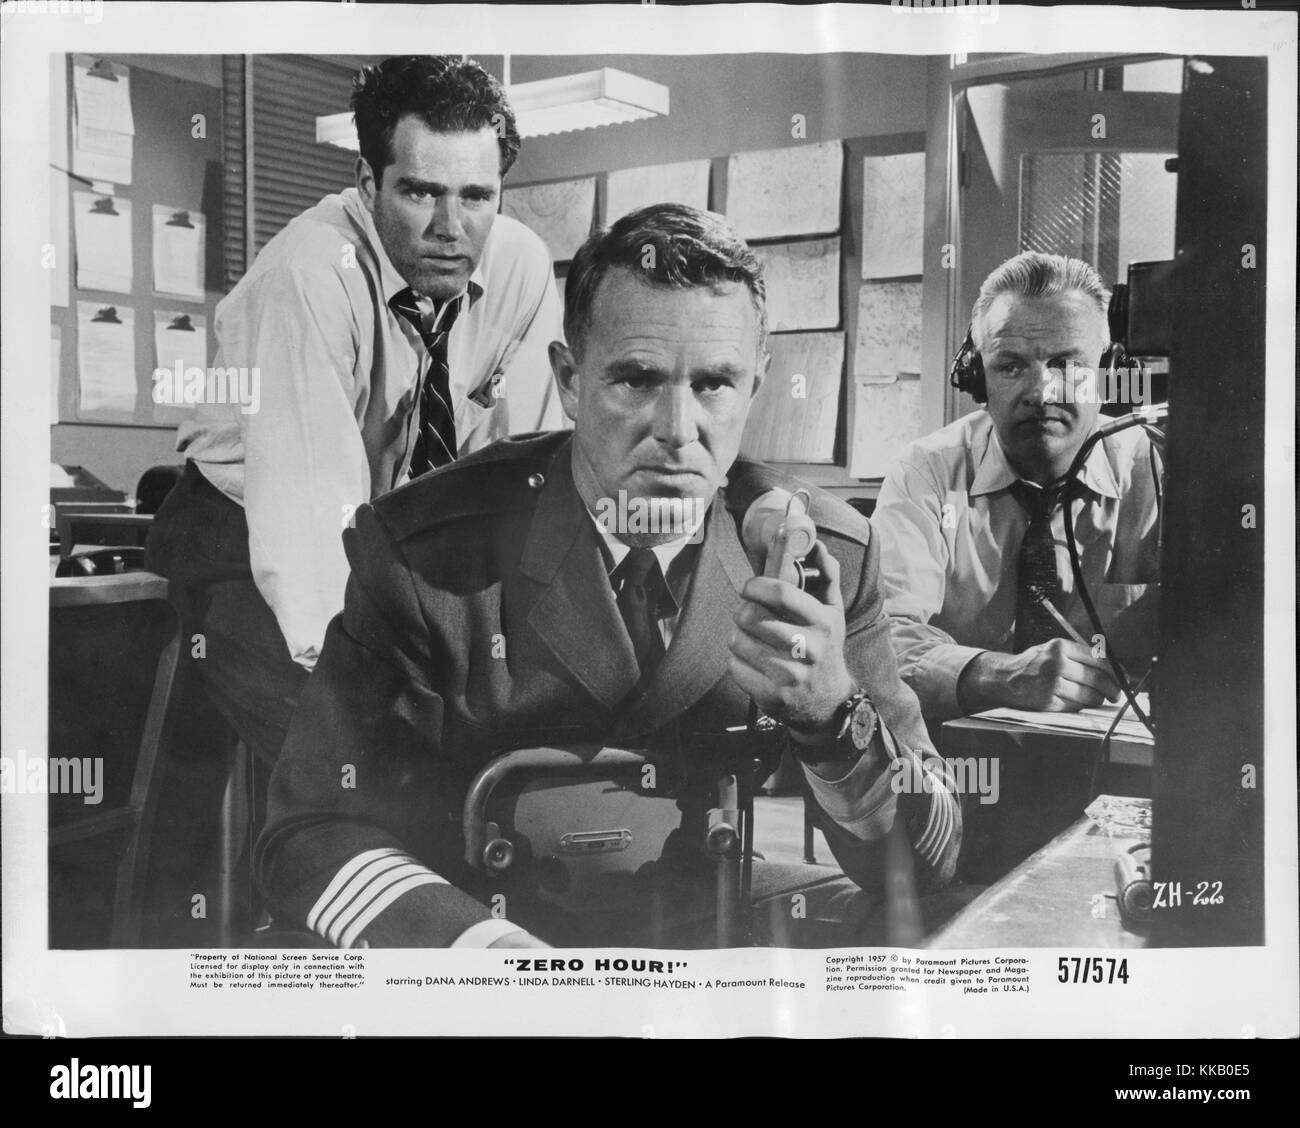 Film still of American actor Sterling Hayden in the film Zero Hero, Hayden appears in the center of the still, actor Charles Quinlivan appears on the left and actor Larry Thor appears on the right, 1957. Stock Photo